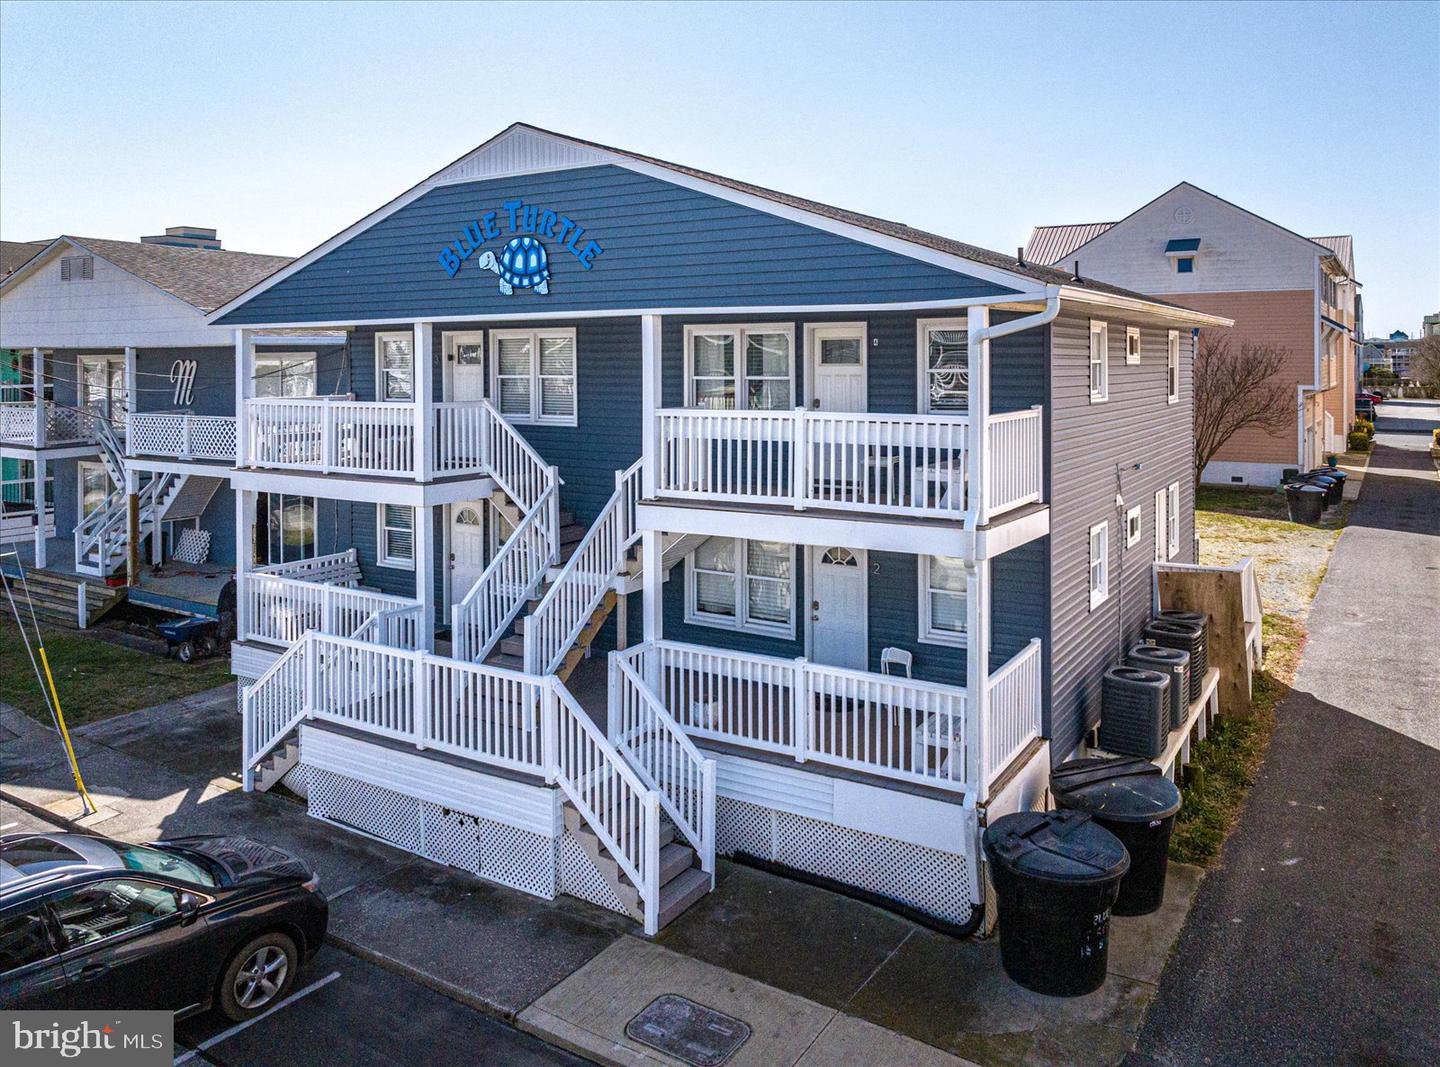 MDWO2019490-802929058318-2024-03-16-10-46-22 15 57th St | Ocean City, MD Real Estate For Sale | MLS# Mdwo2019490  - 1st Choice Properties